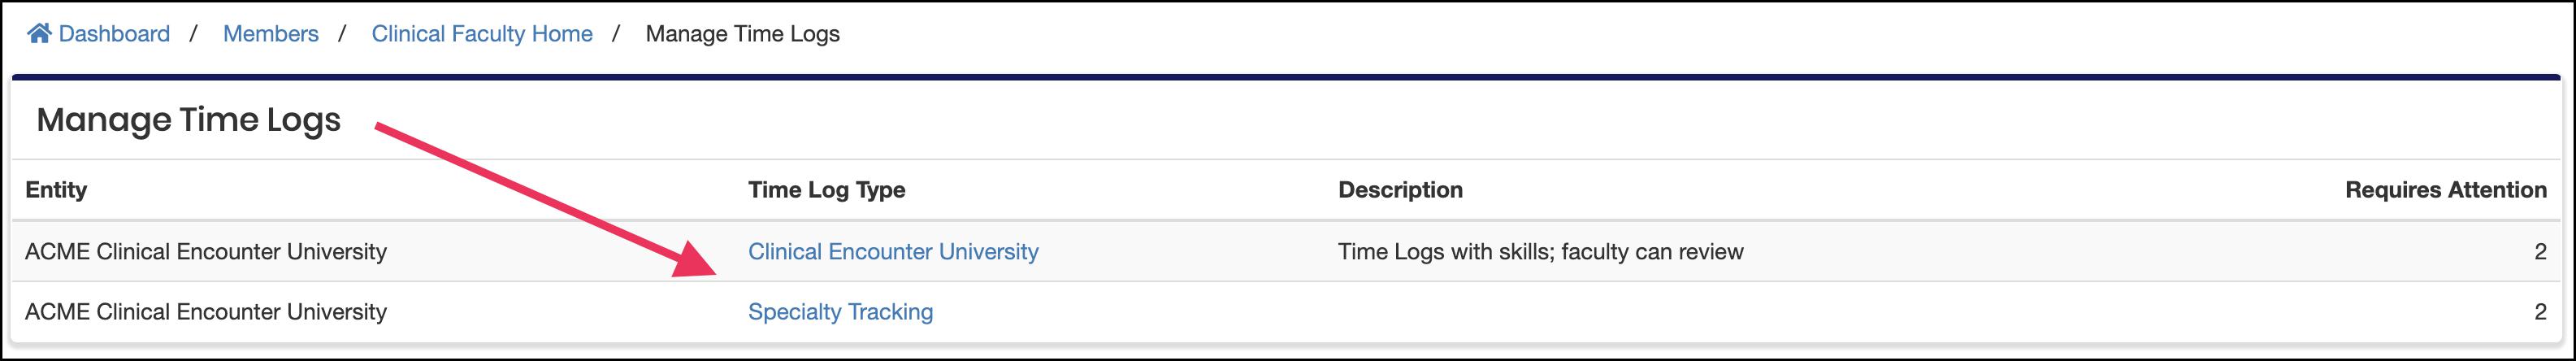 image Manage Time Logs table, pointing to Time Log type column